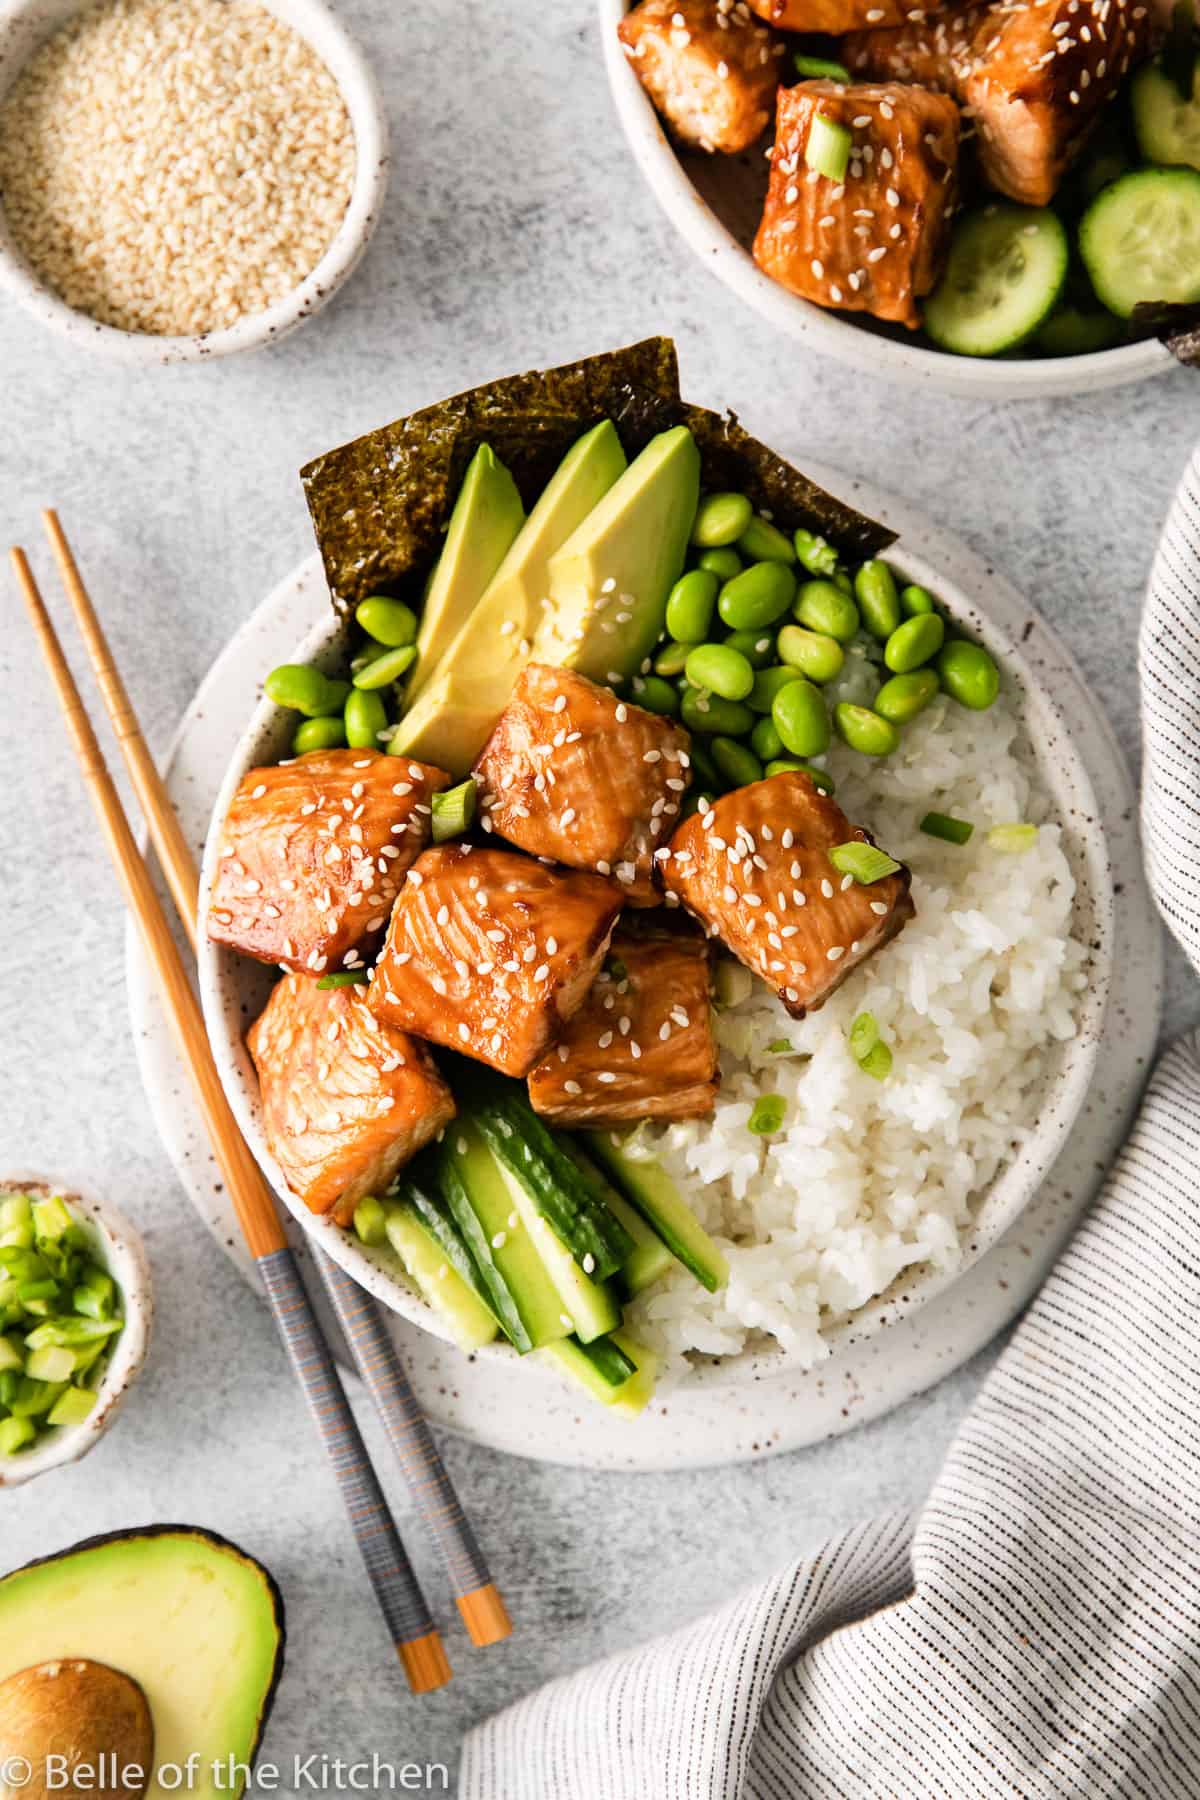 salmon chunks and vegetables on rice in a bowl next to chopsticks